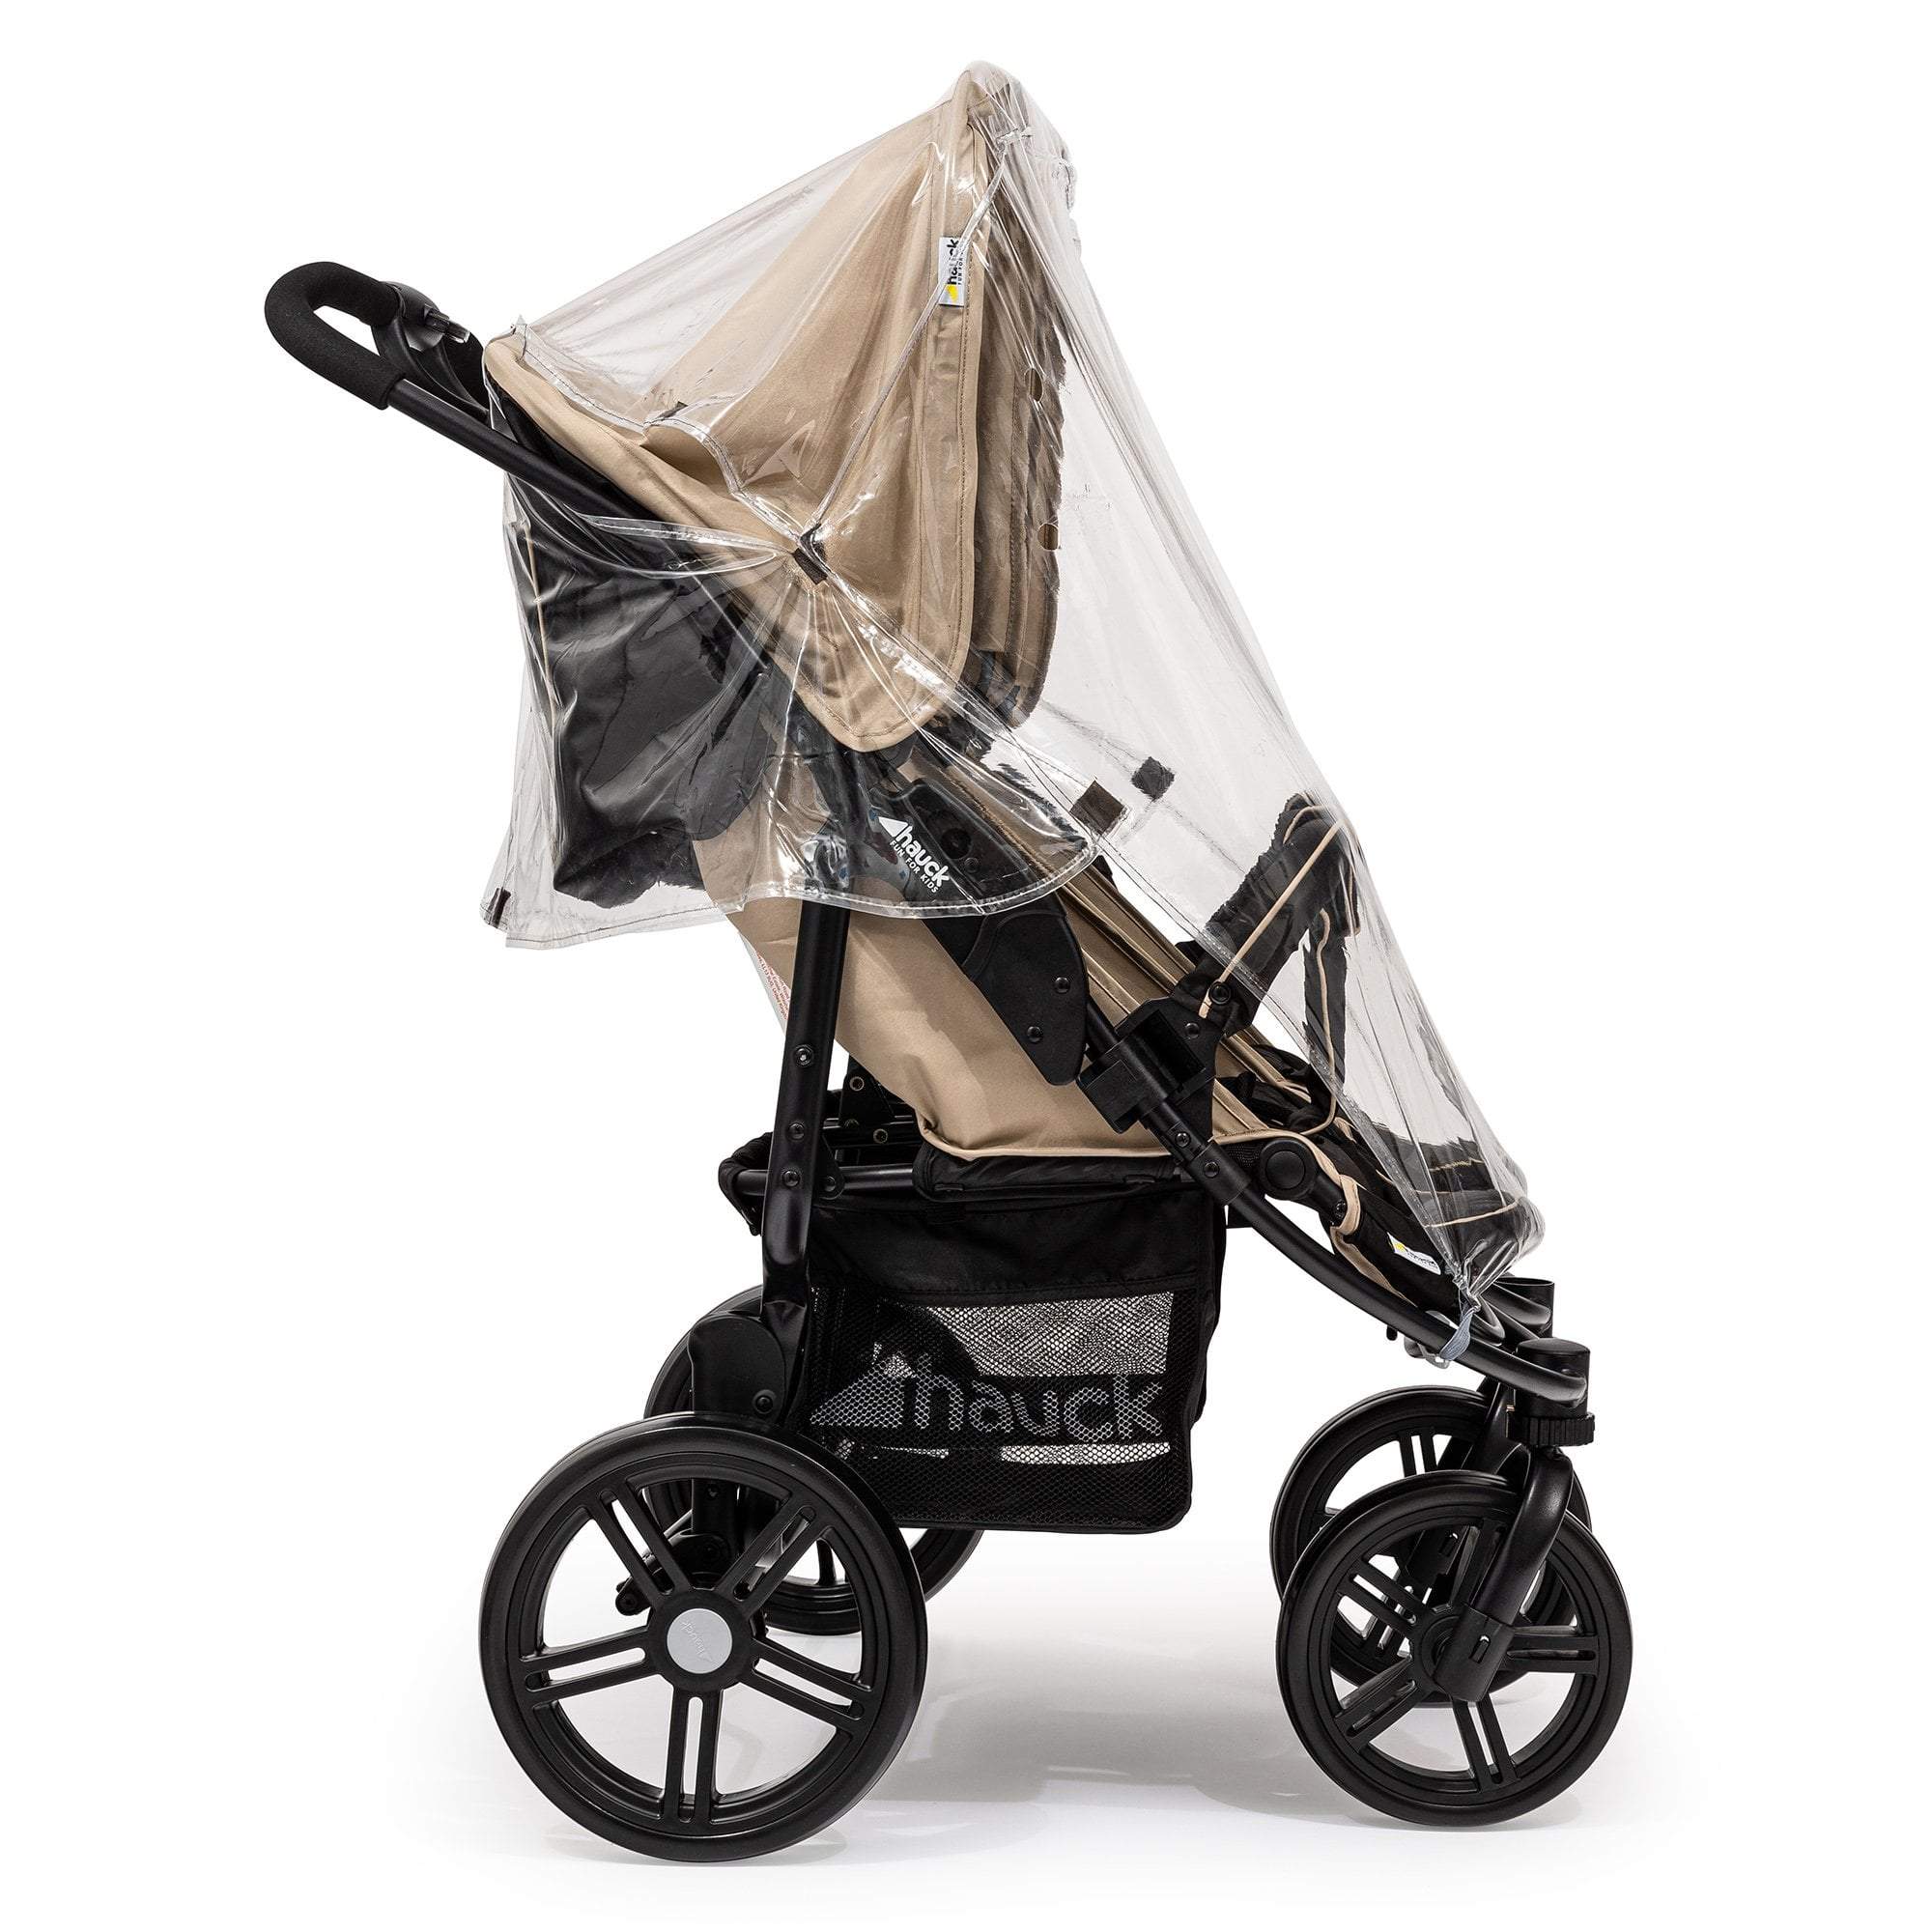 Side by Side Raincover Compatible with Bumbleride - For Your Little One